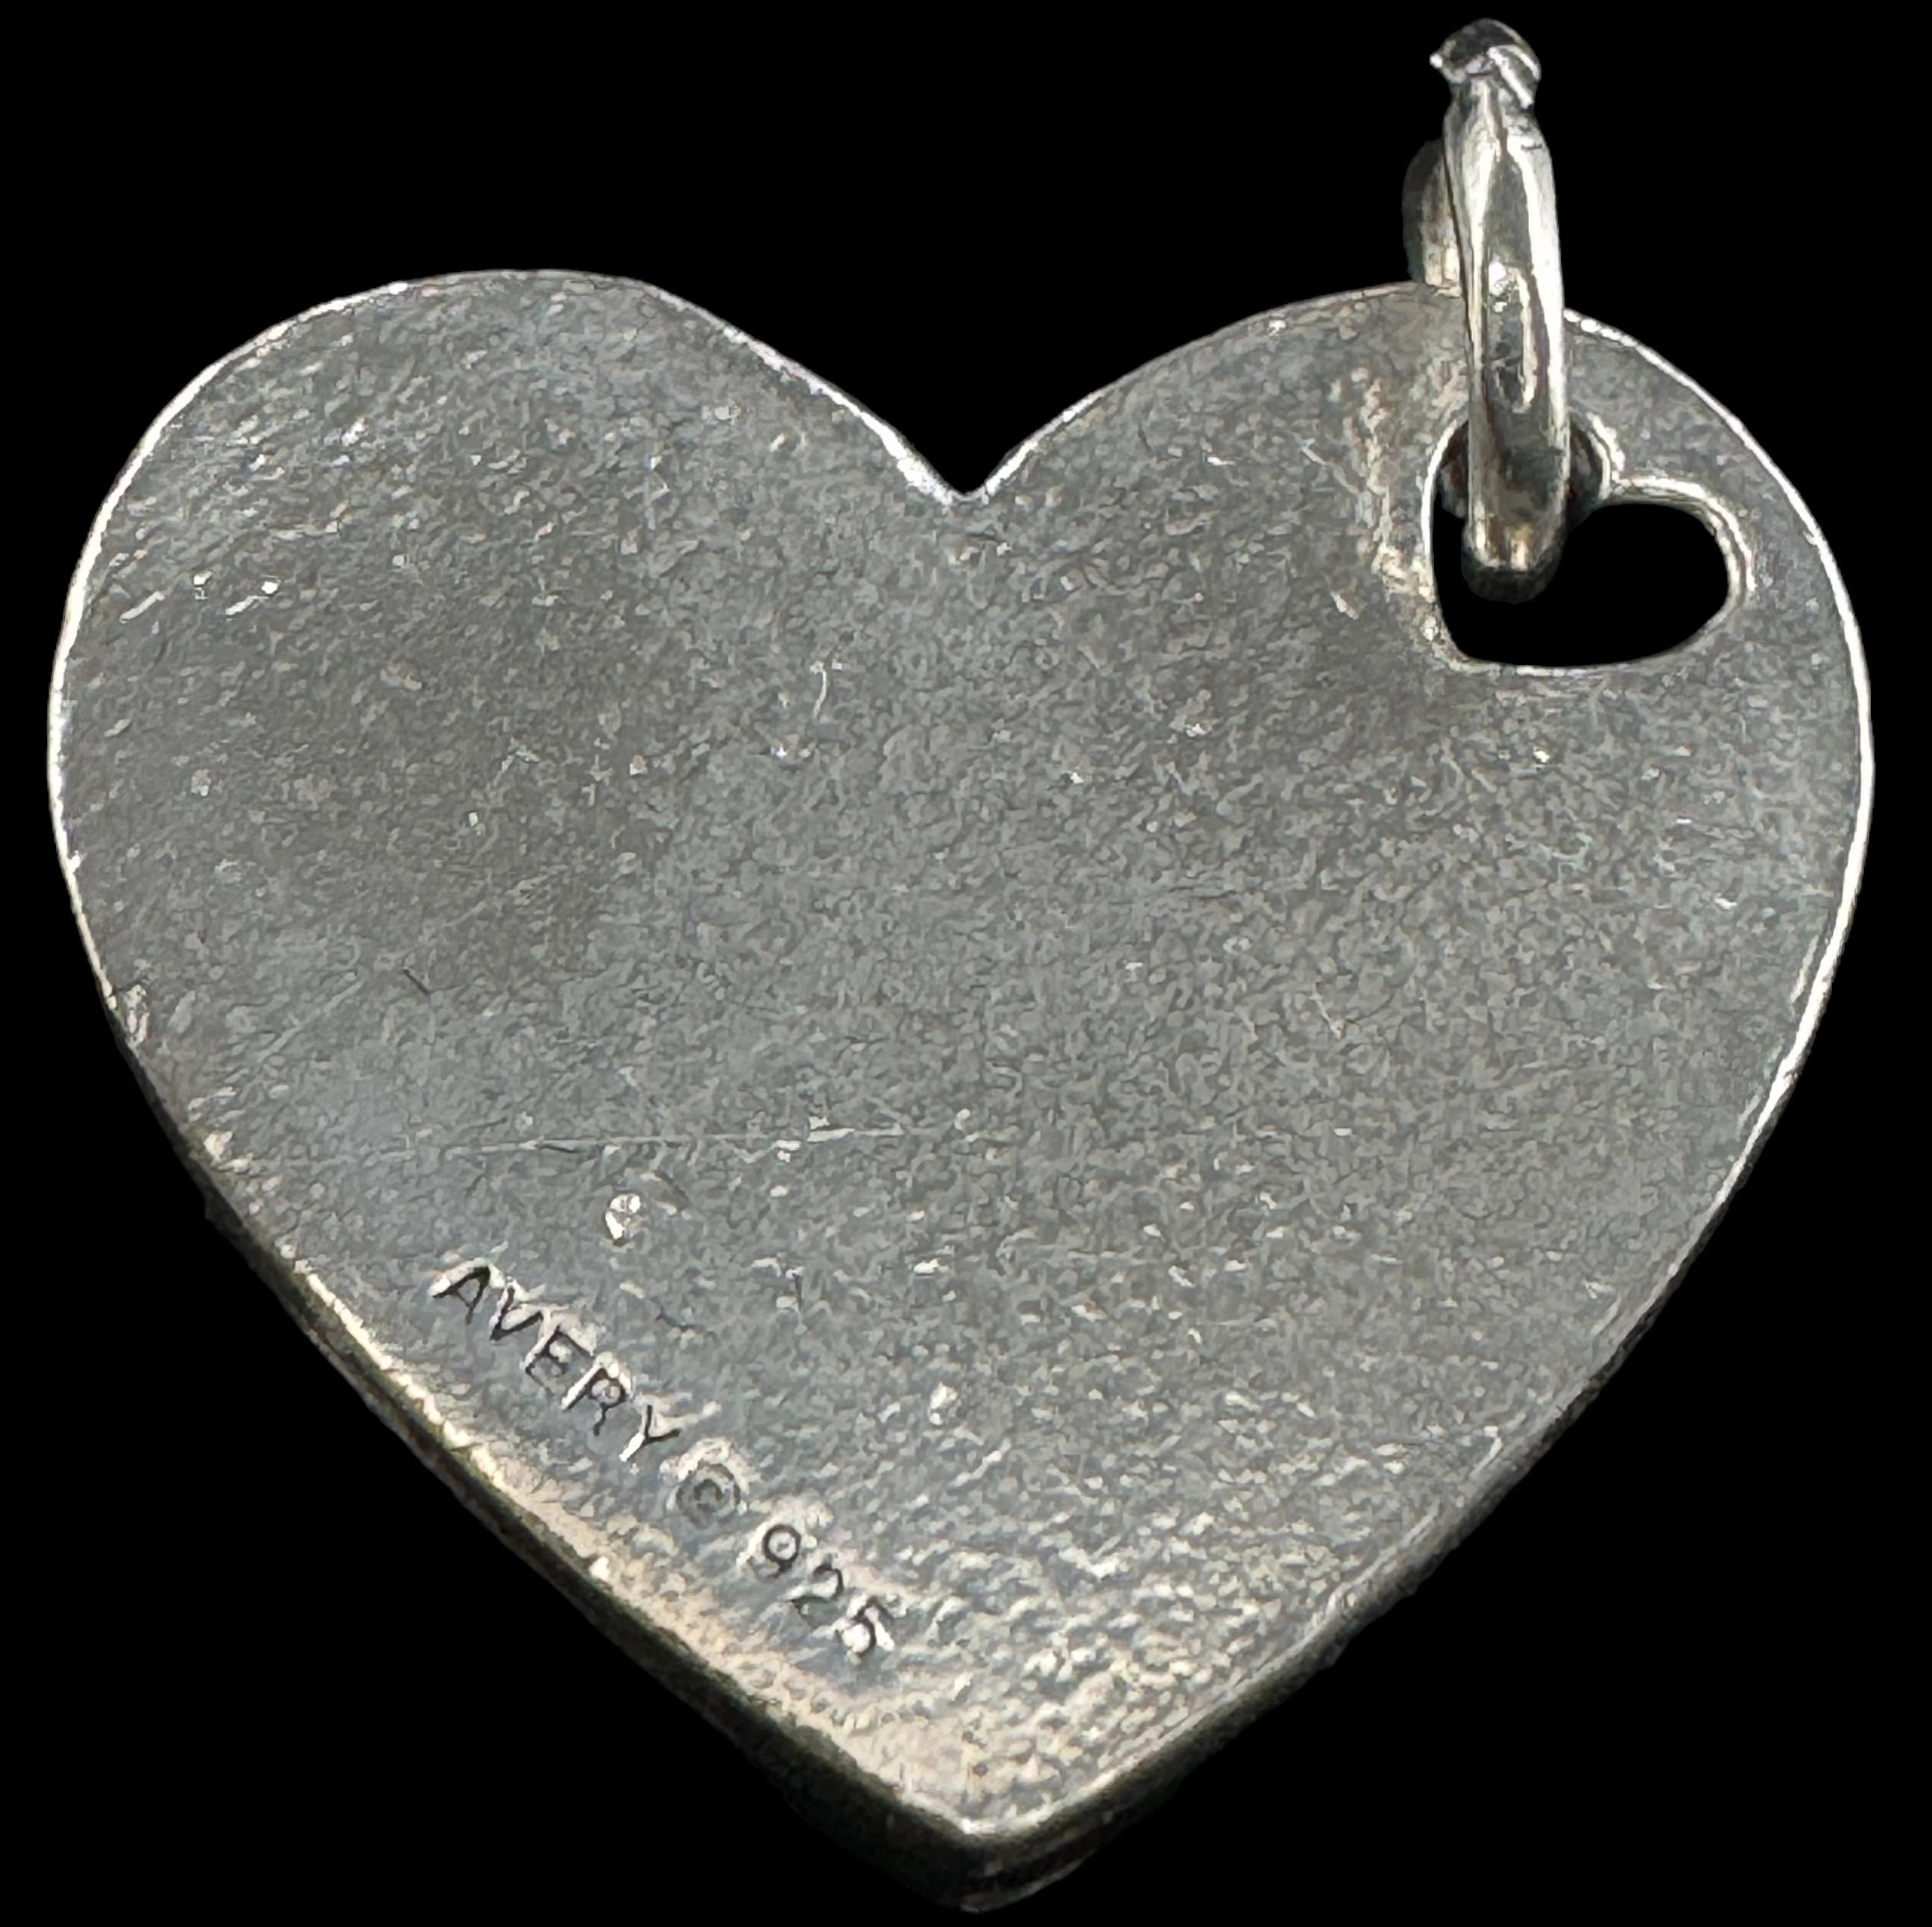 Estate James Avery sterling silver "Sister in my heart" charm